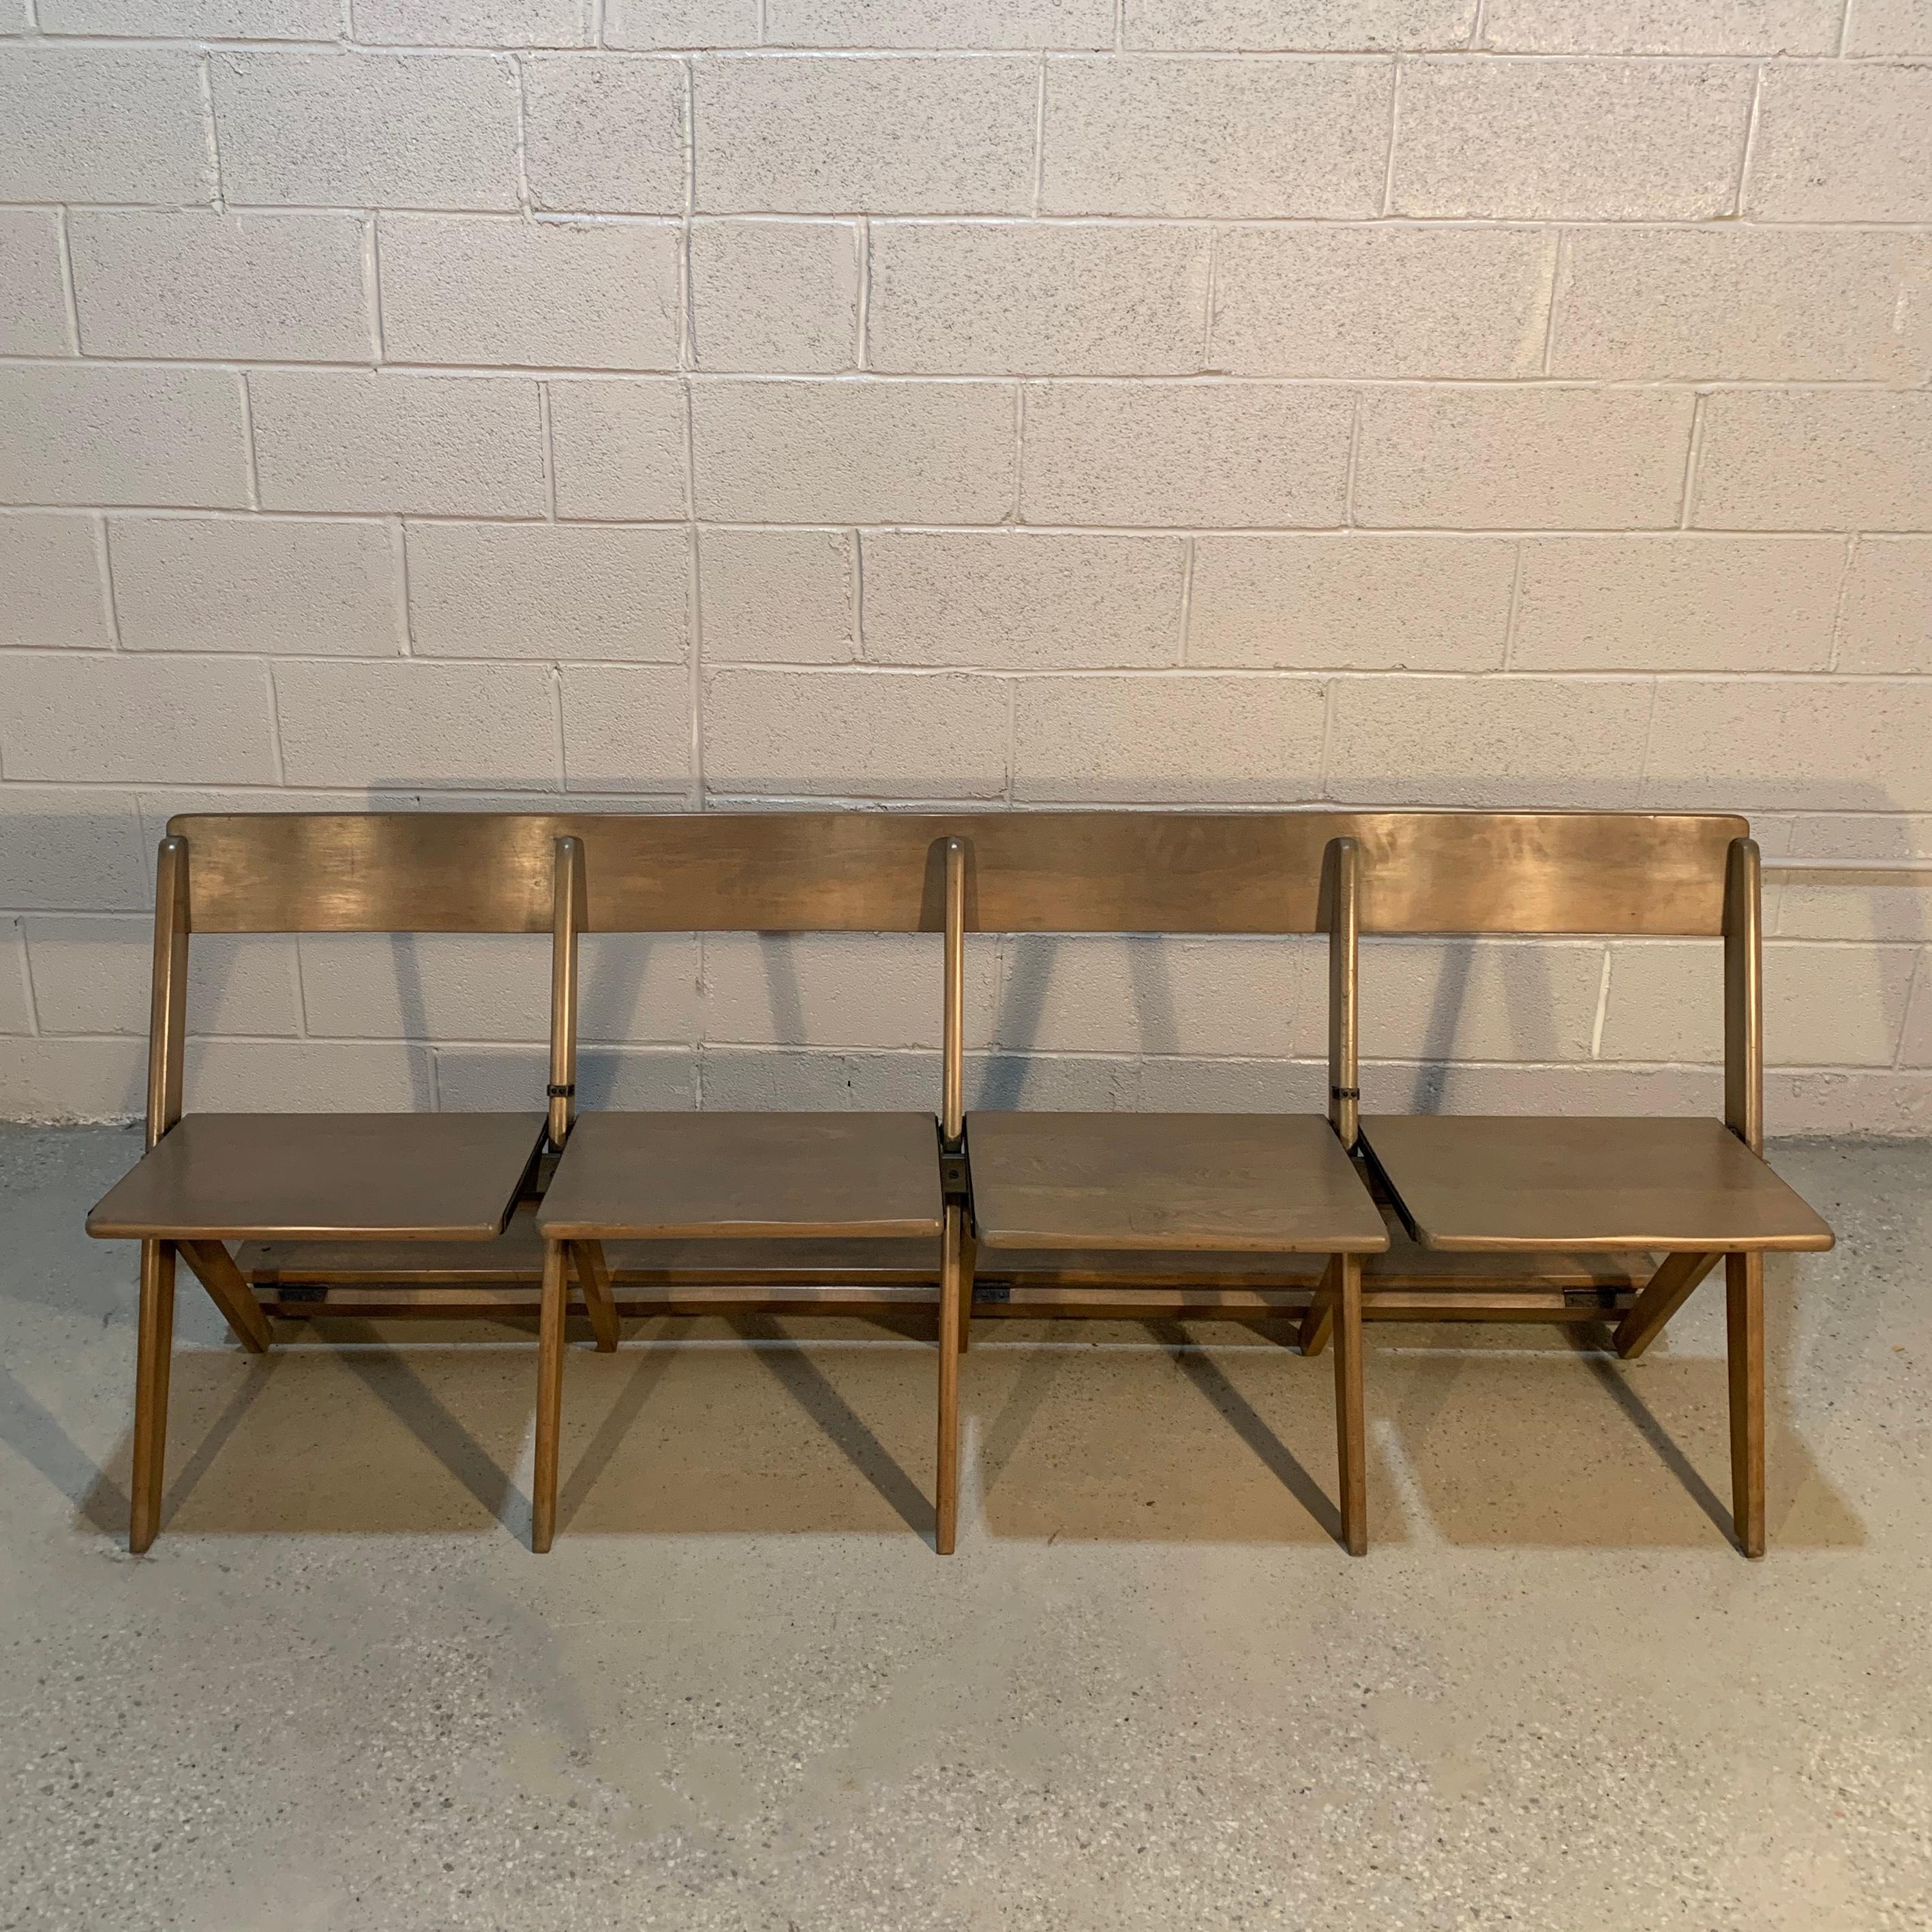 Midcentury, pickled maple, conjoined 4-seat, auditorium, theater, folding bench with back flap.